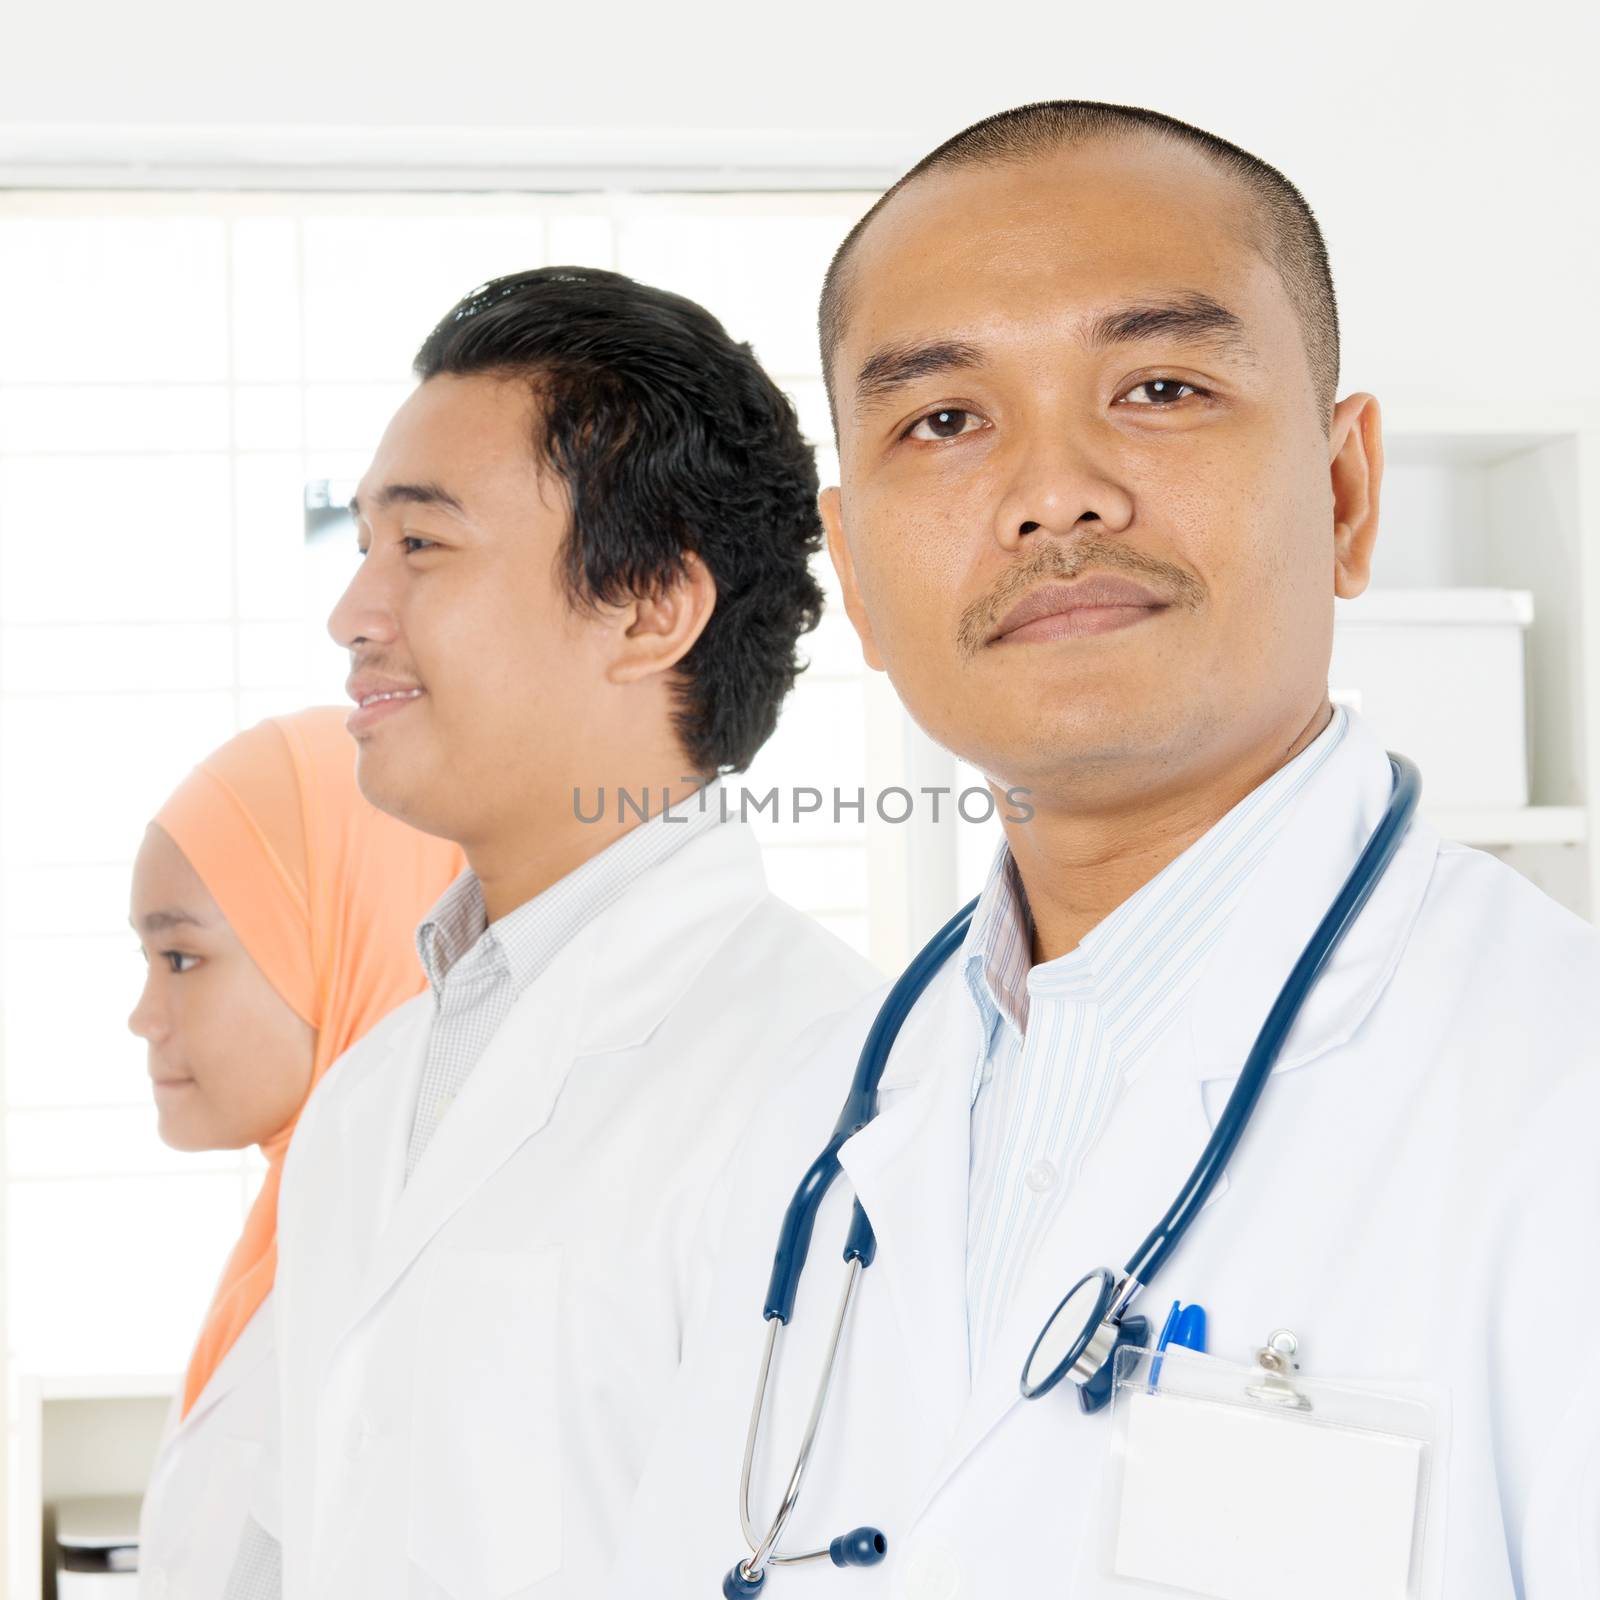 Portrait of medical team at hospital office, Southeast Asian Muslim doctors and nurses.